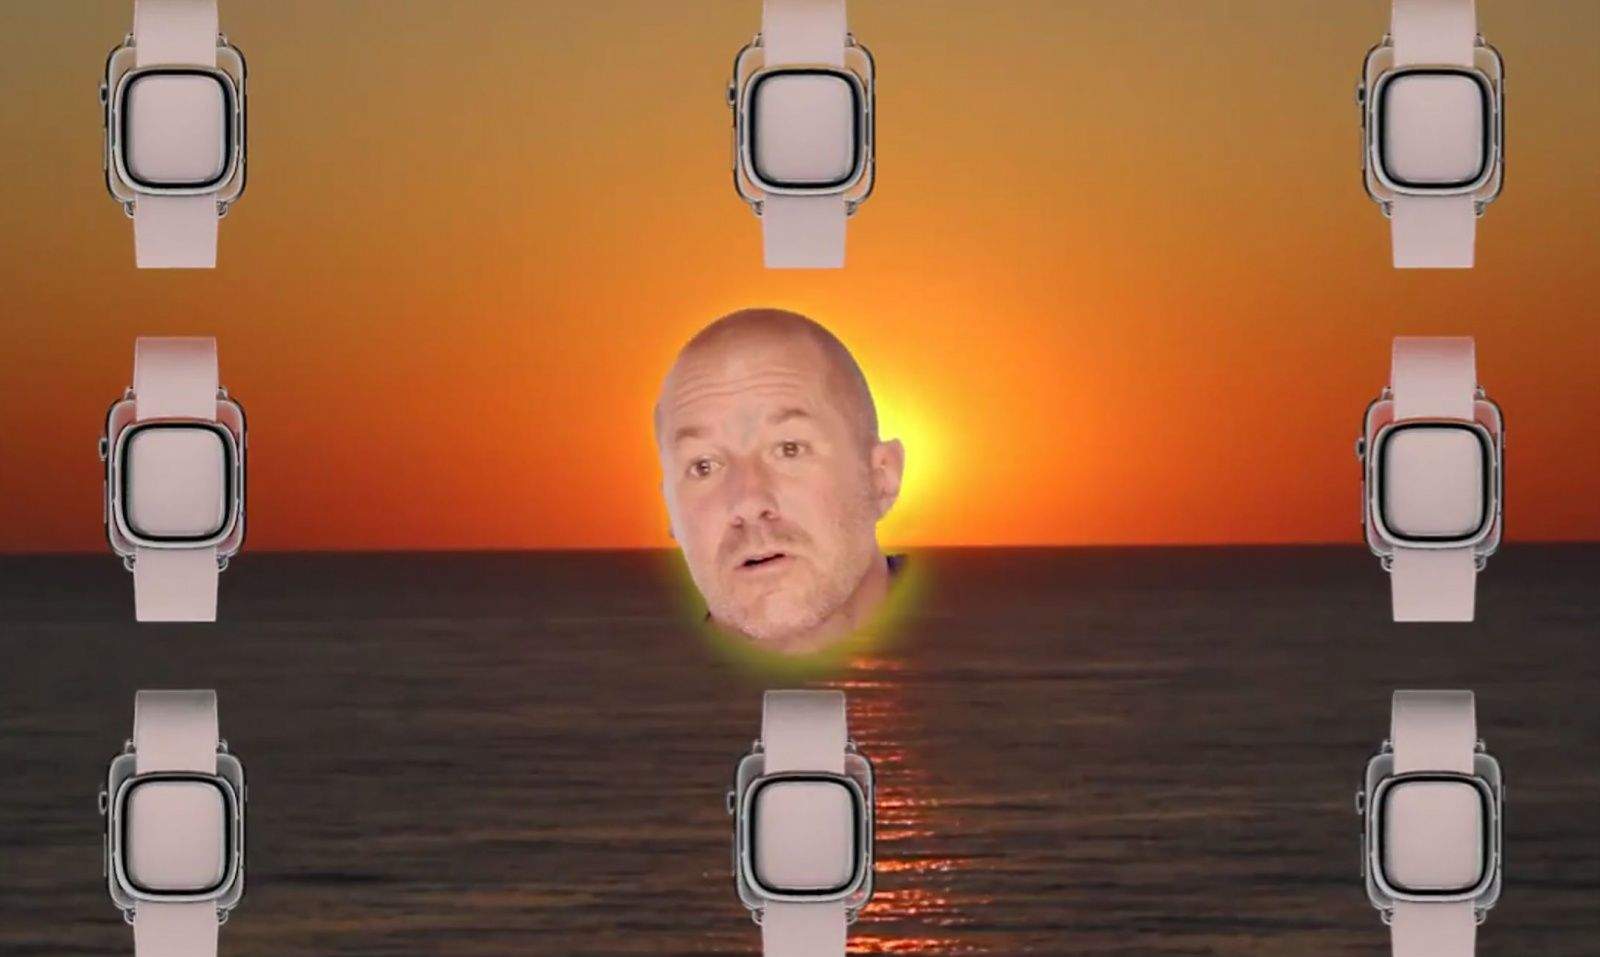 A starry-eyed Jony Ive raves about the Apple Watch in a new parody video. Photo: Gizmodo